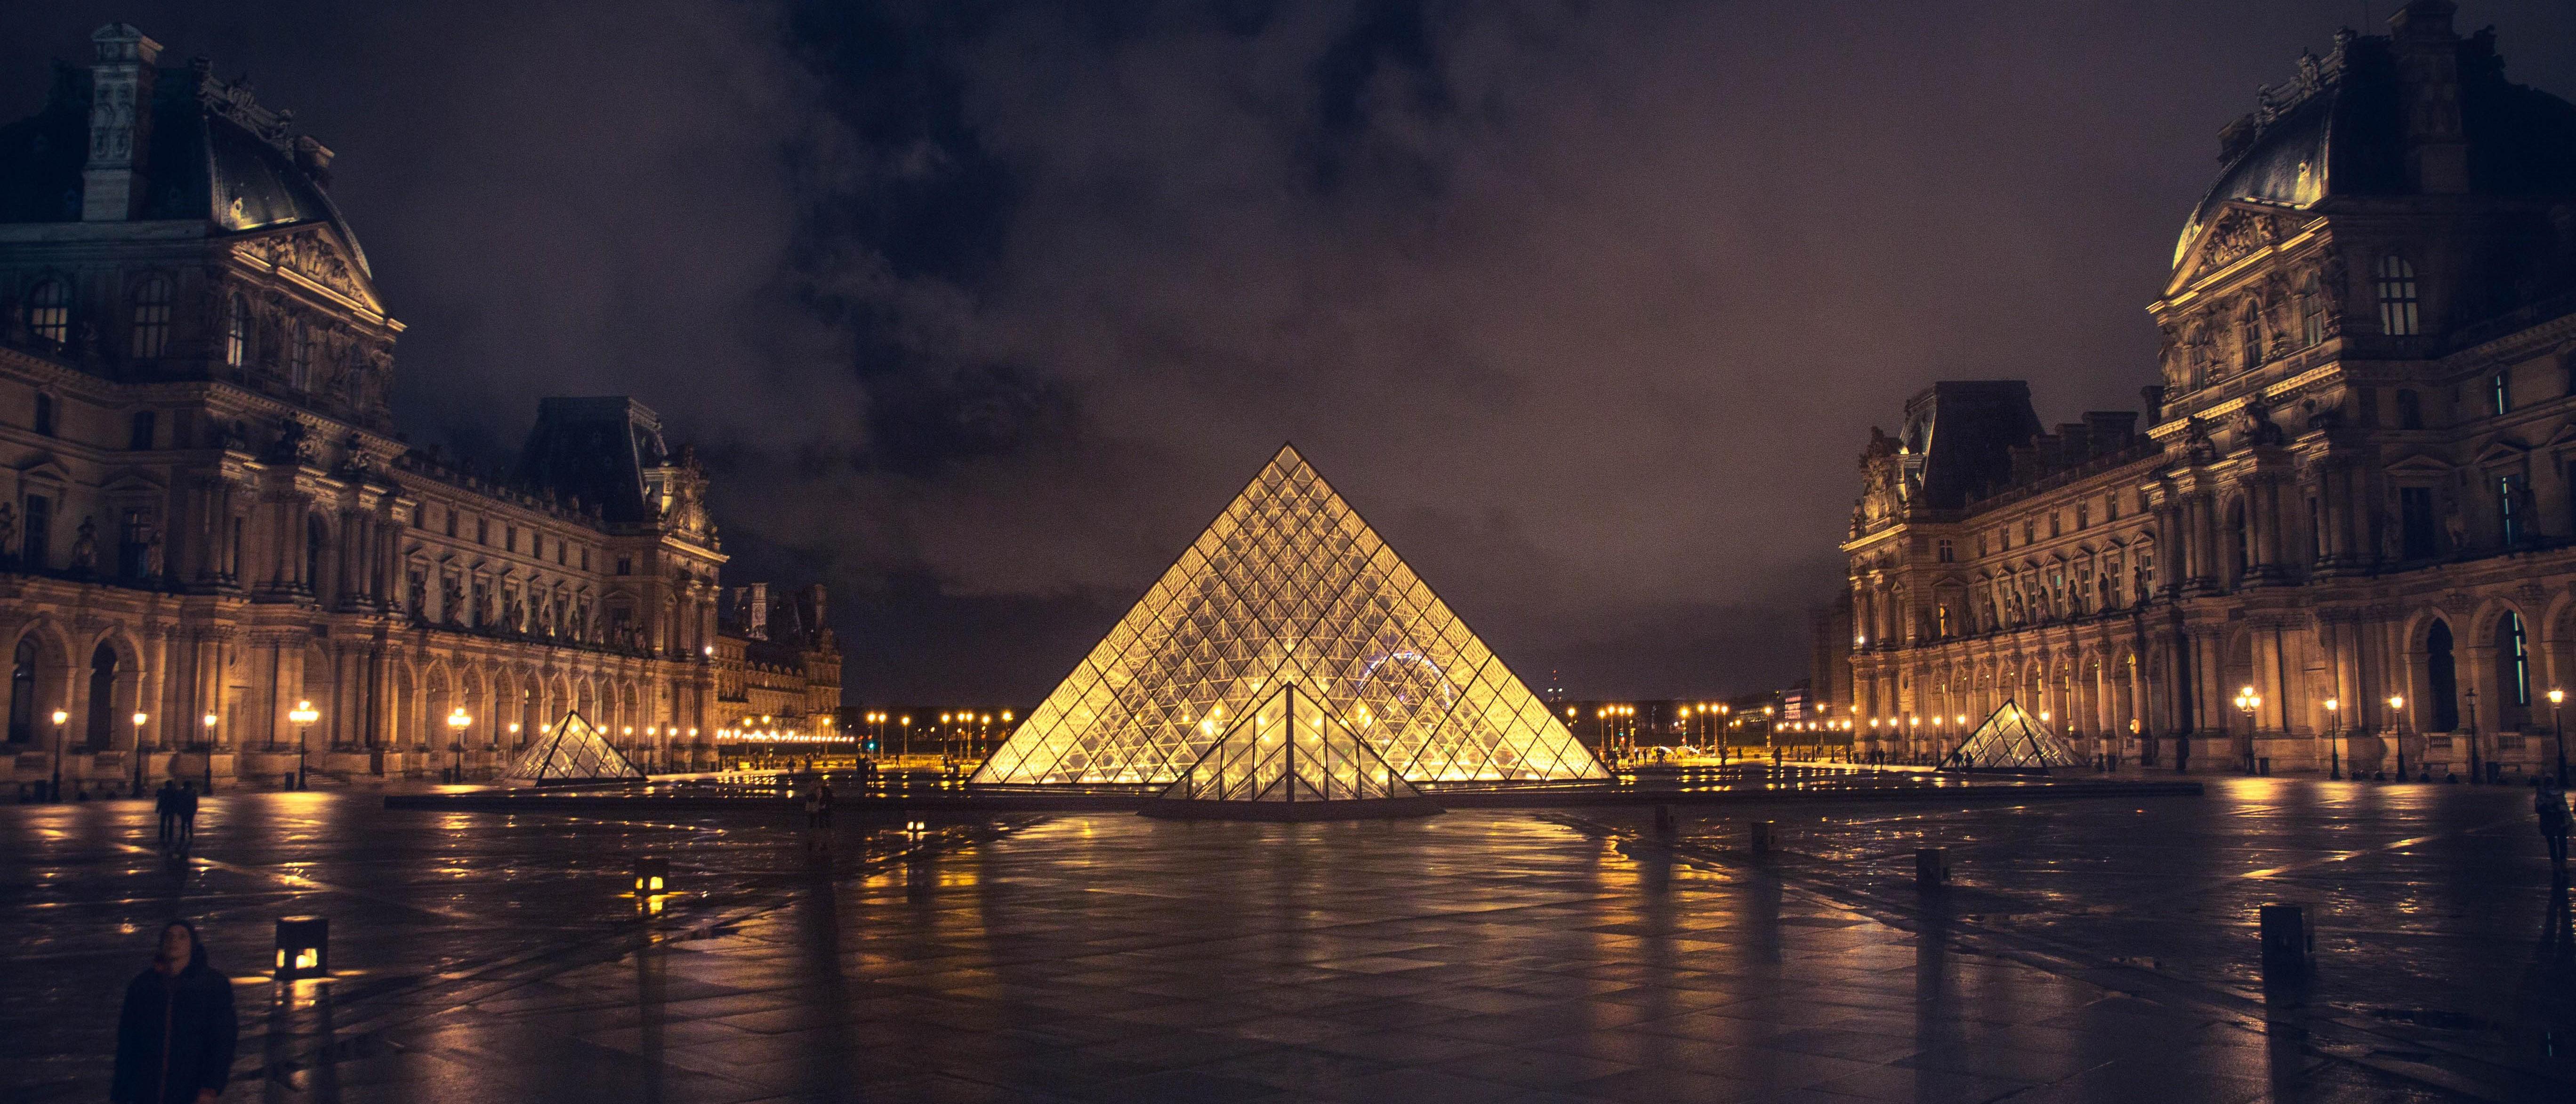 Pyramide du Louvre from rtravel [5472x2346] WidescreenWallpaper